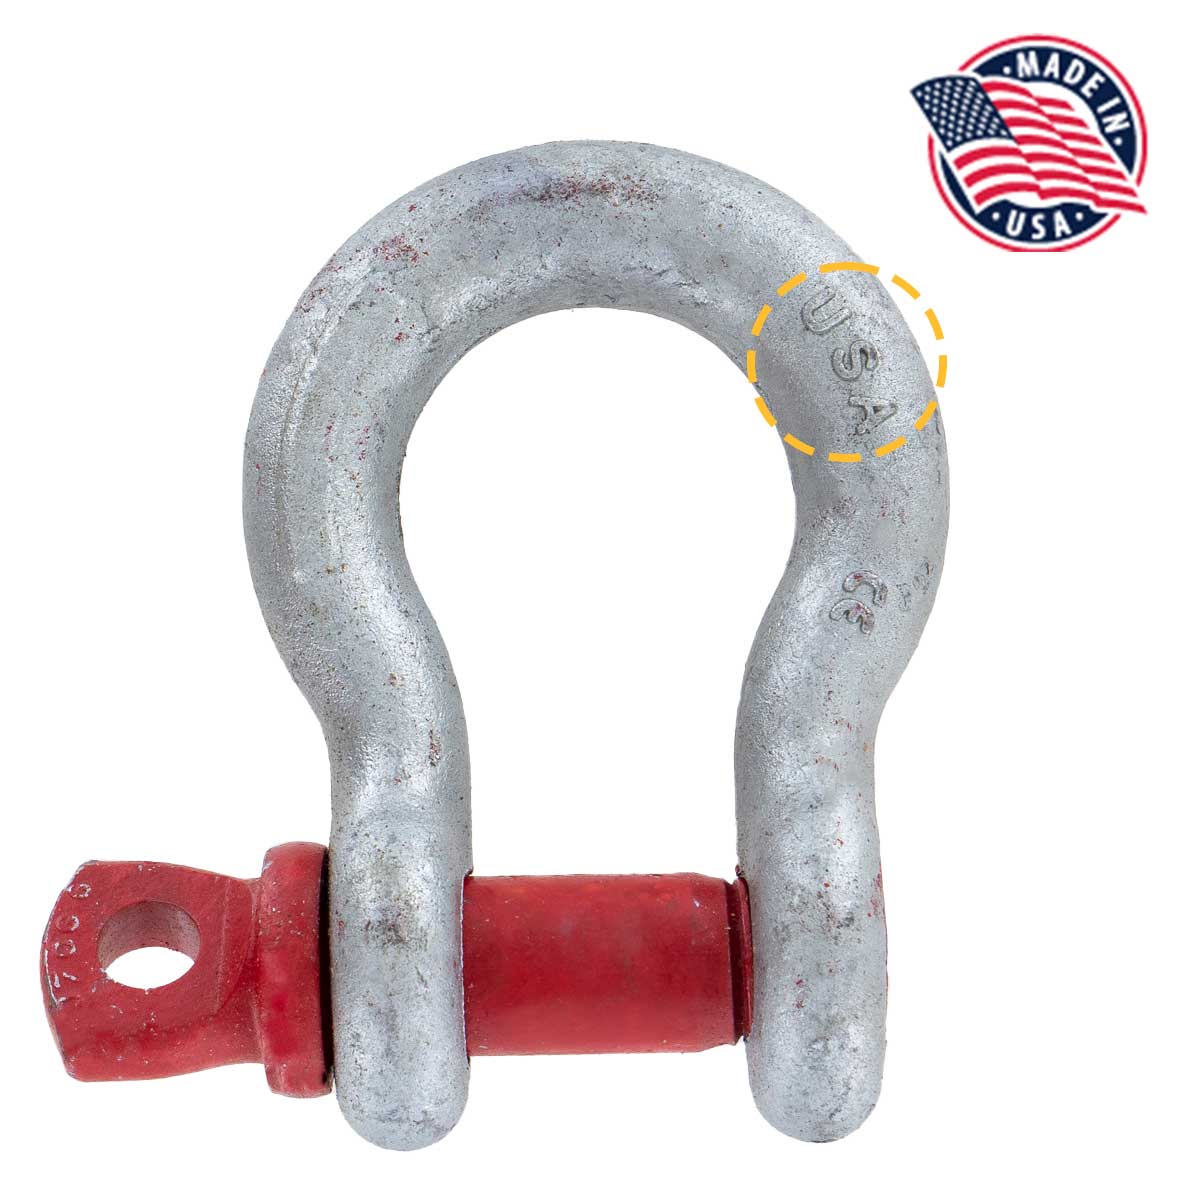 3/16" Crosby® Screw Pin Anchor Shackle | G-209 - 0.33 Ton made in USA